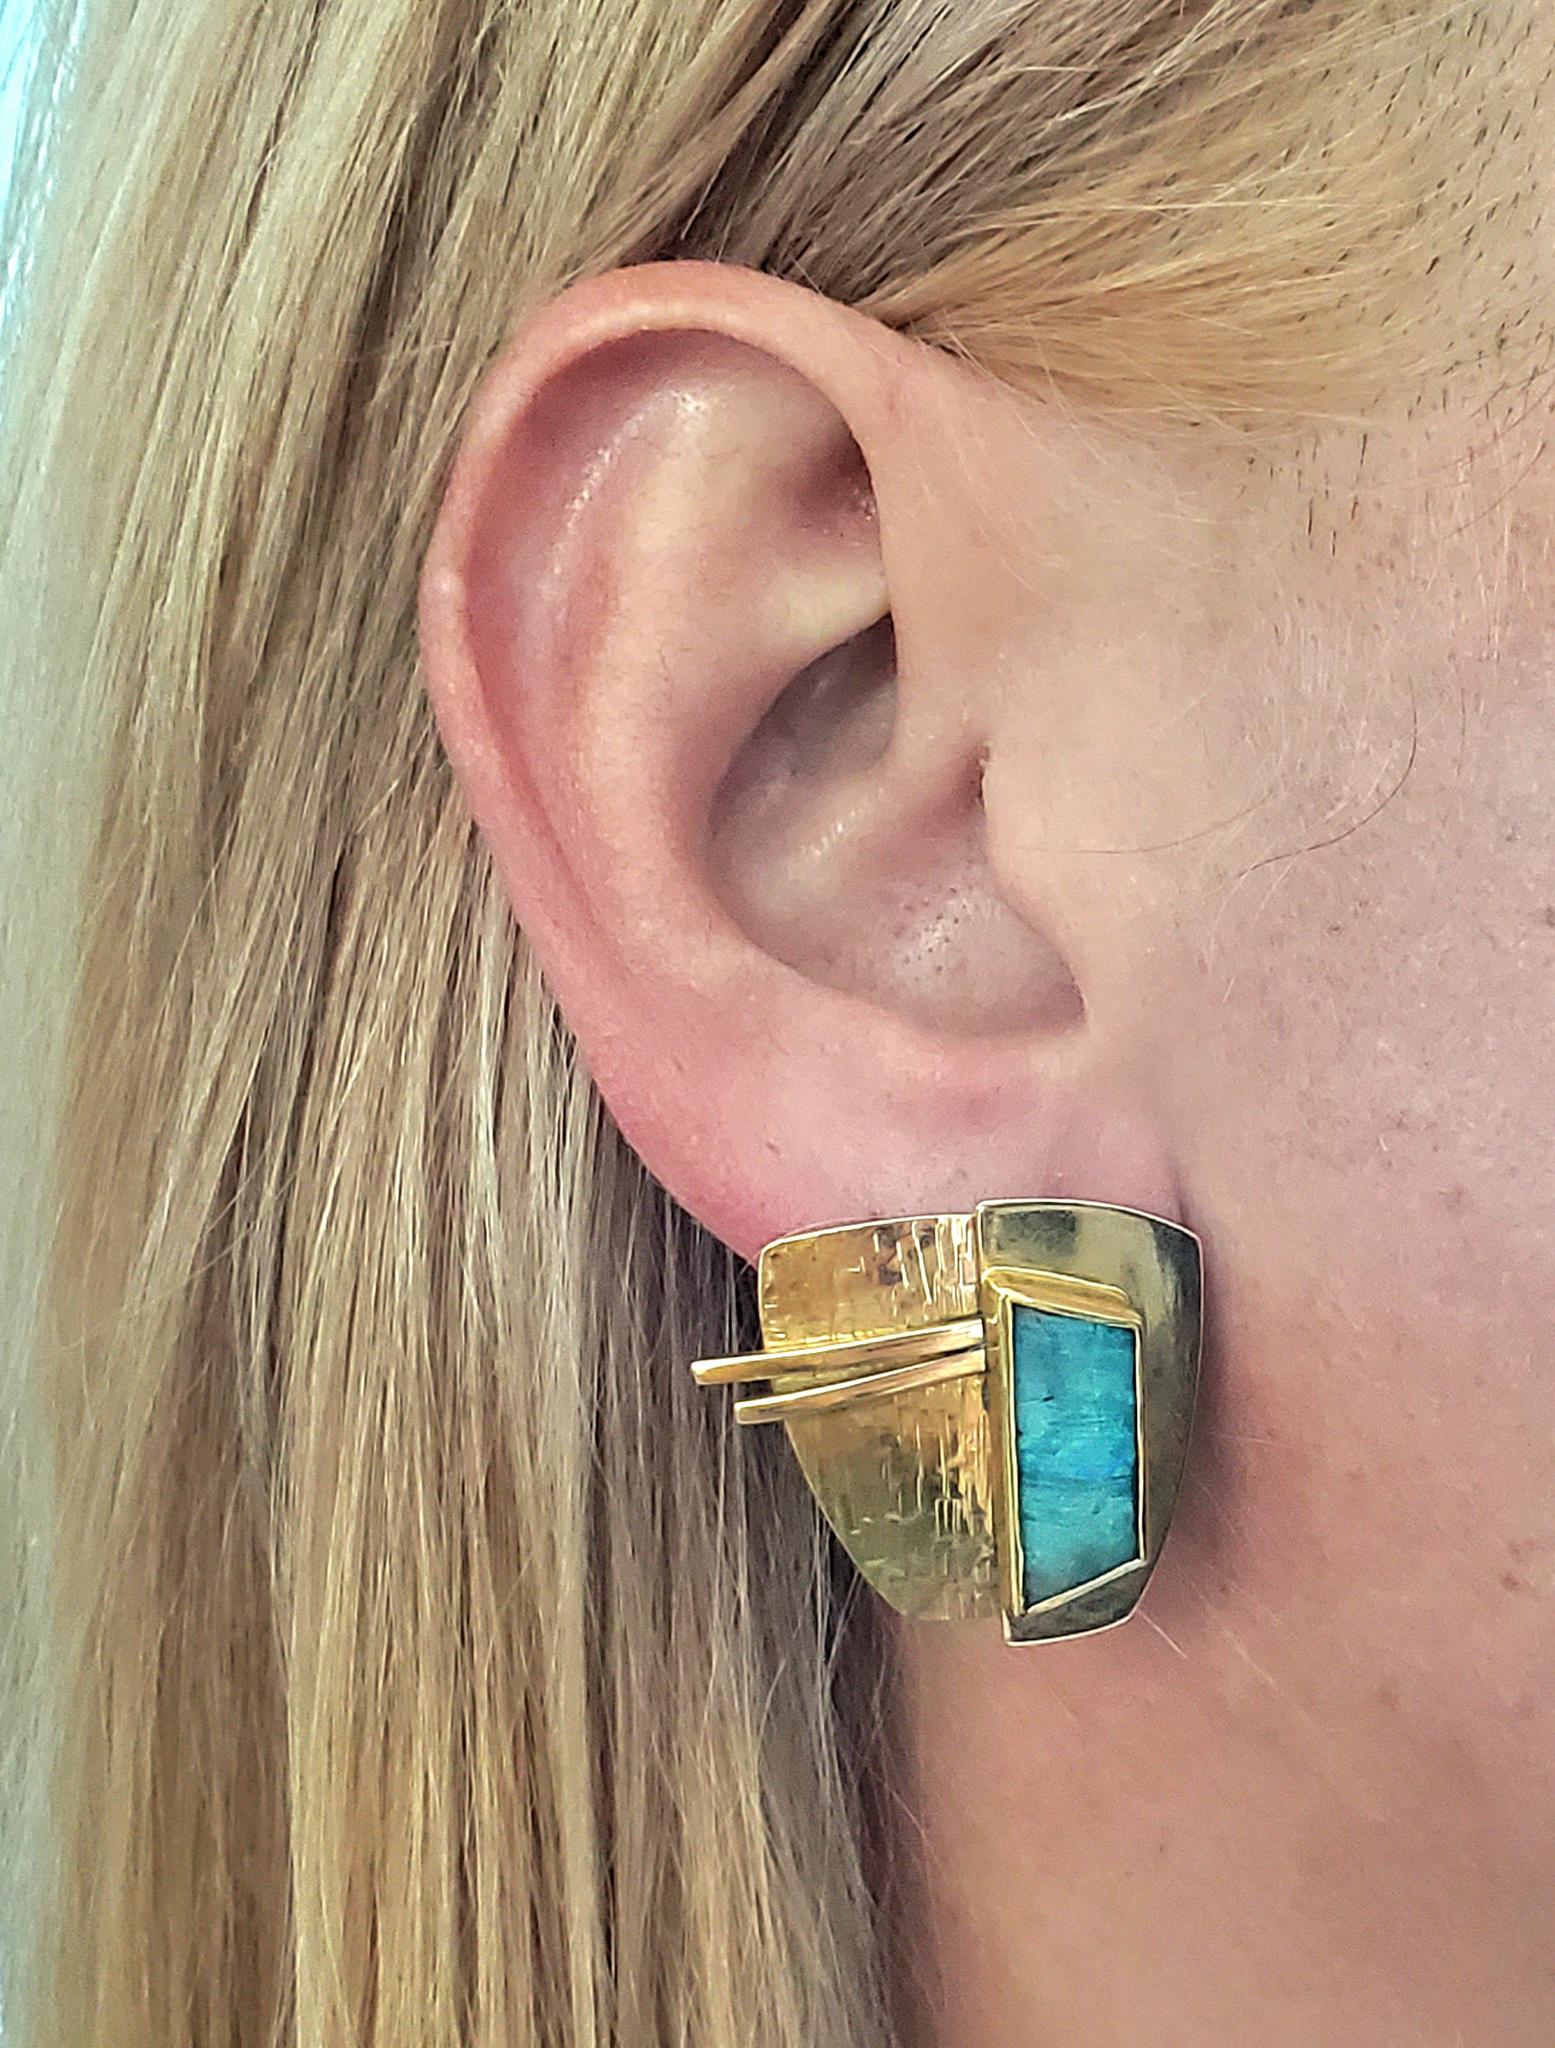 Sculptural earrings designed by Tom Odell.

Fabulous sculptural earrings created in Chattan Massachusett by the studio jewelry artist Tom Odell. This three dimensional geometric earrings has been made with several overlapping elements crafted in